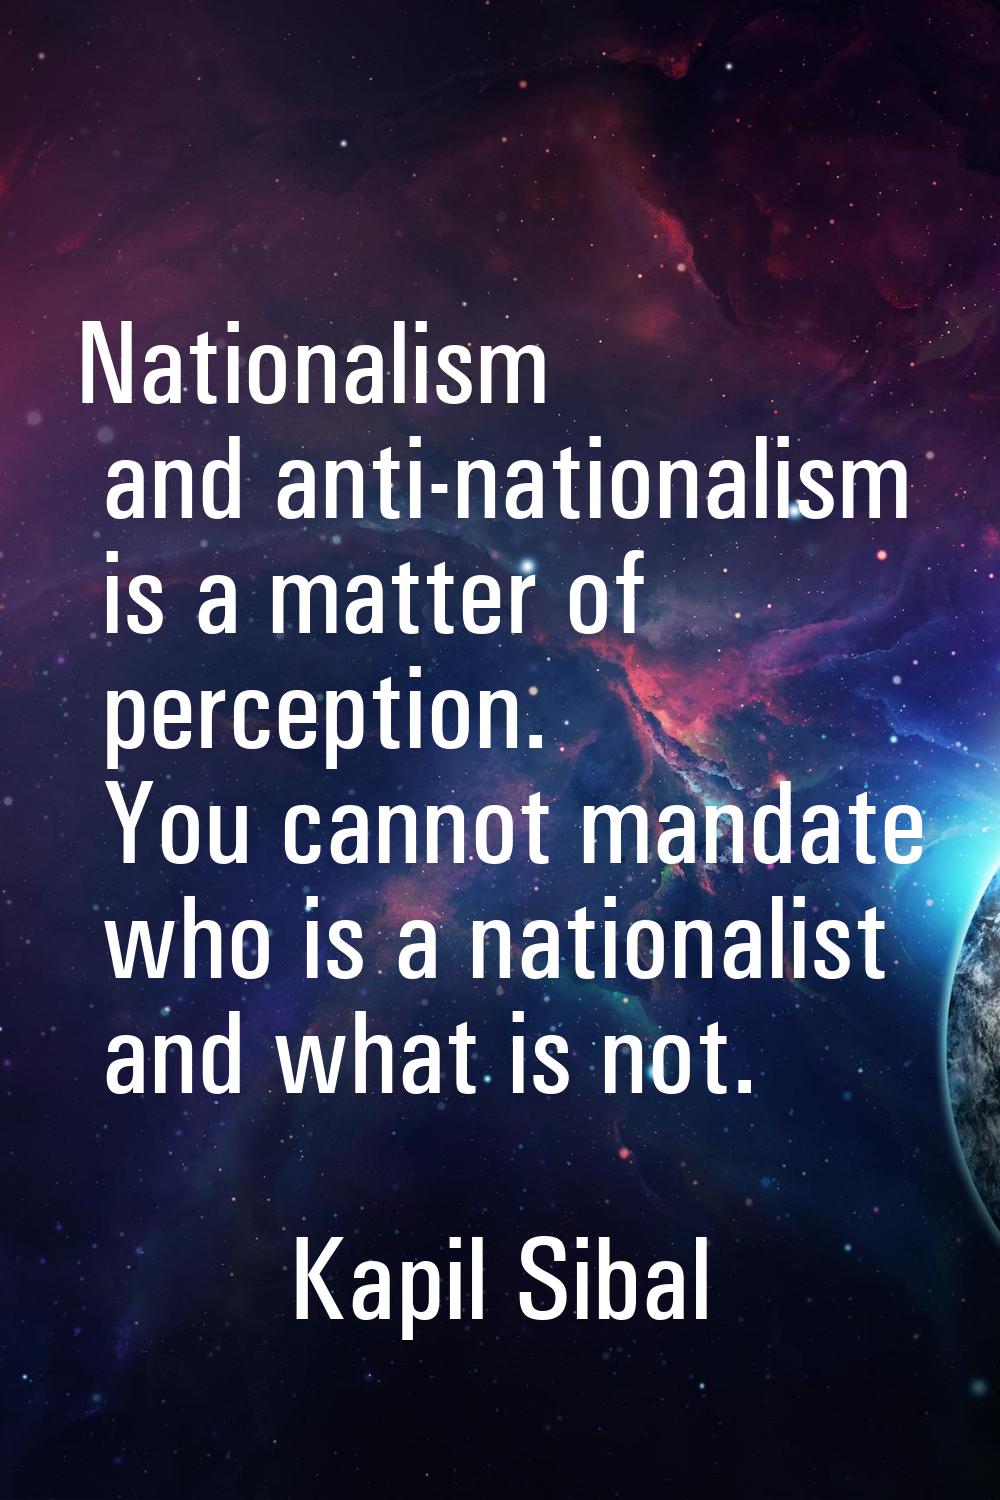 Nationalism and anti-nationalism is a matter of perception. You cannot mandate who is a nationalist